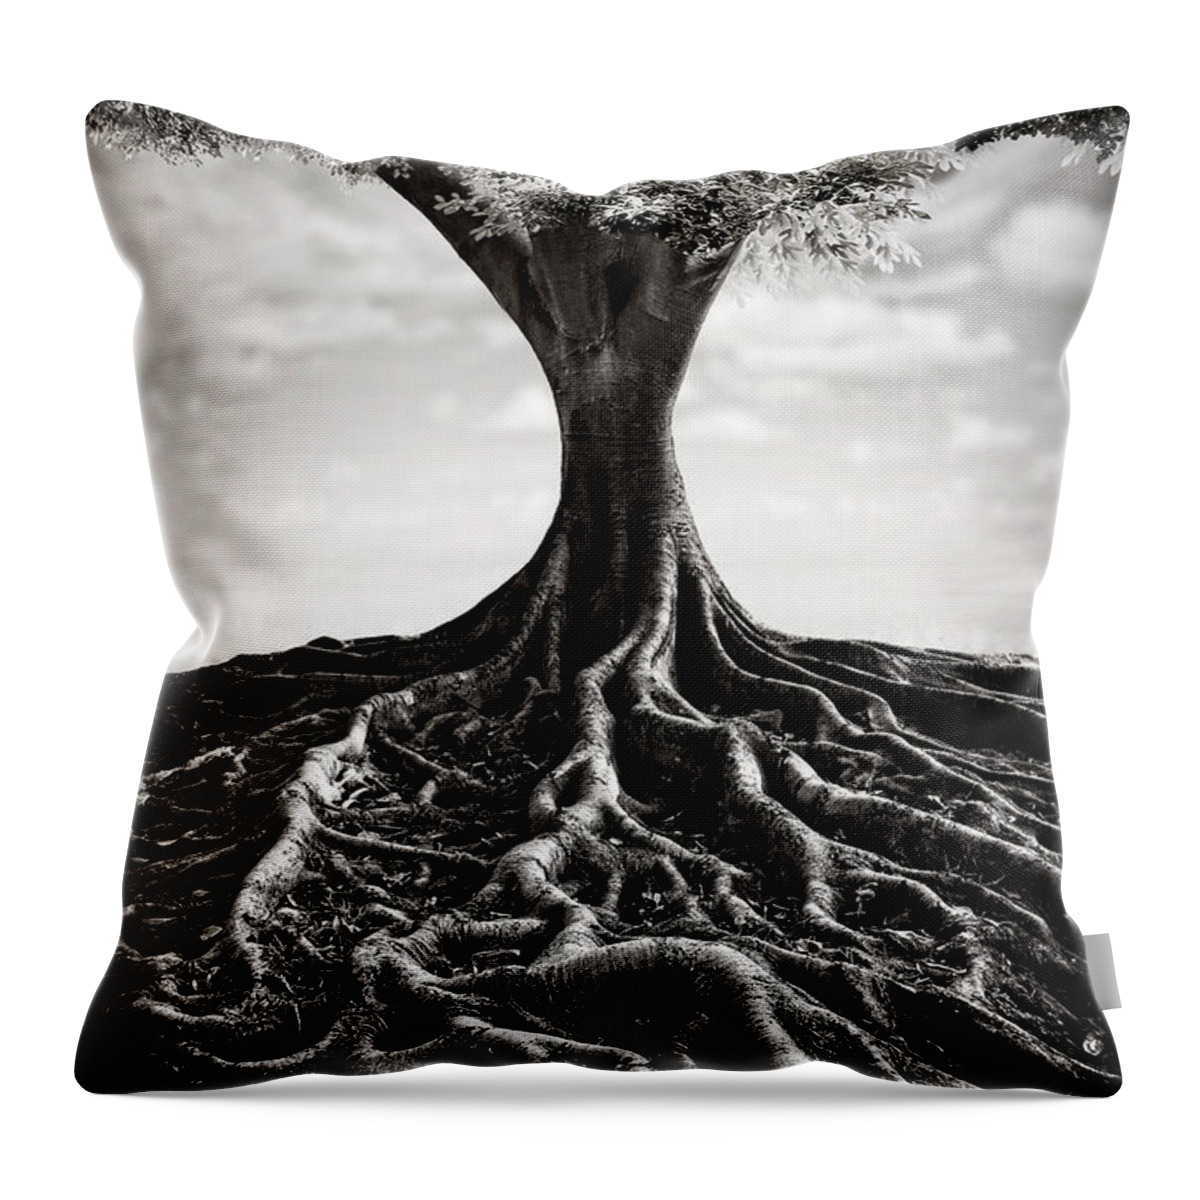 Kremsdorf Throw Pillow featuring the photograph Back To The Roots by Evelina Kremsdorf